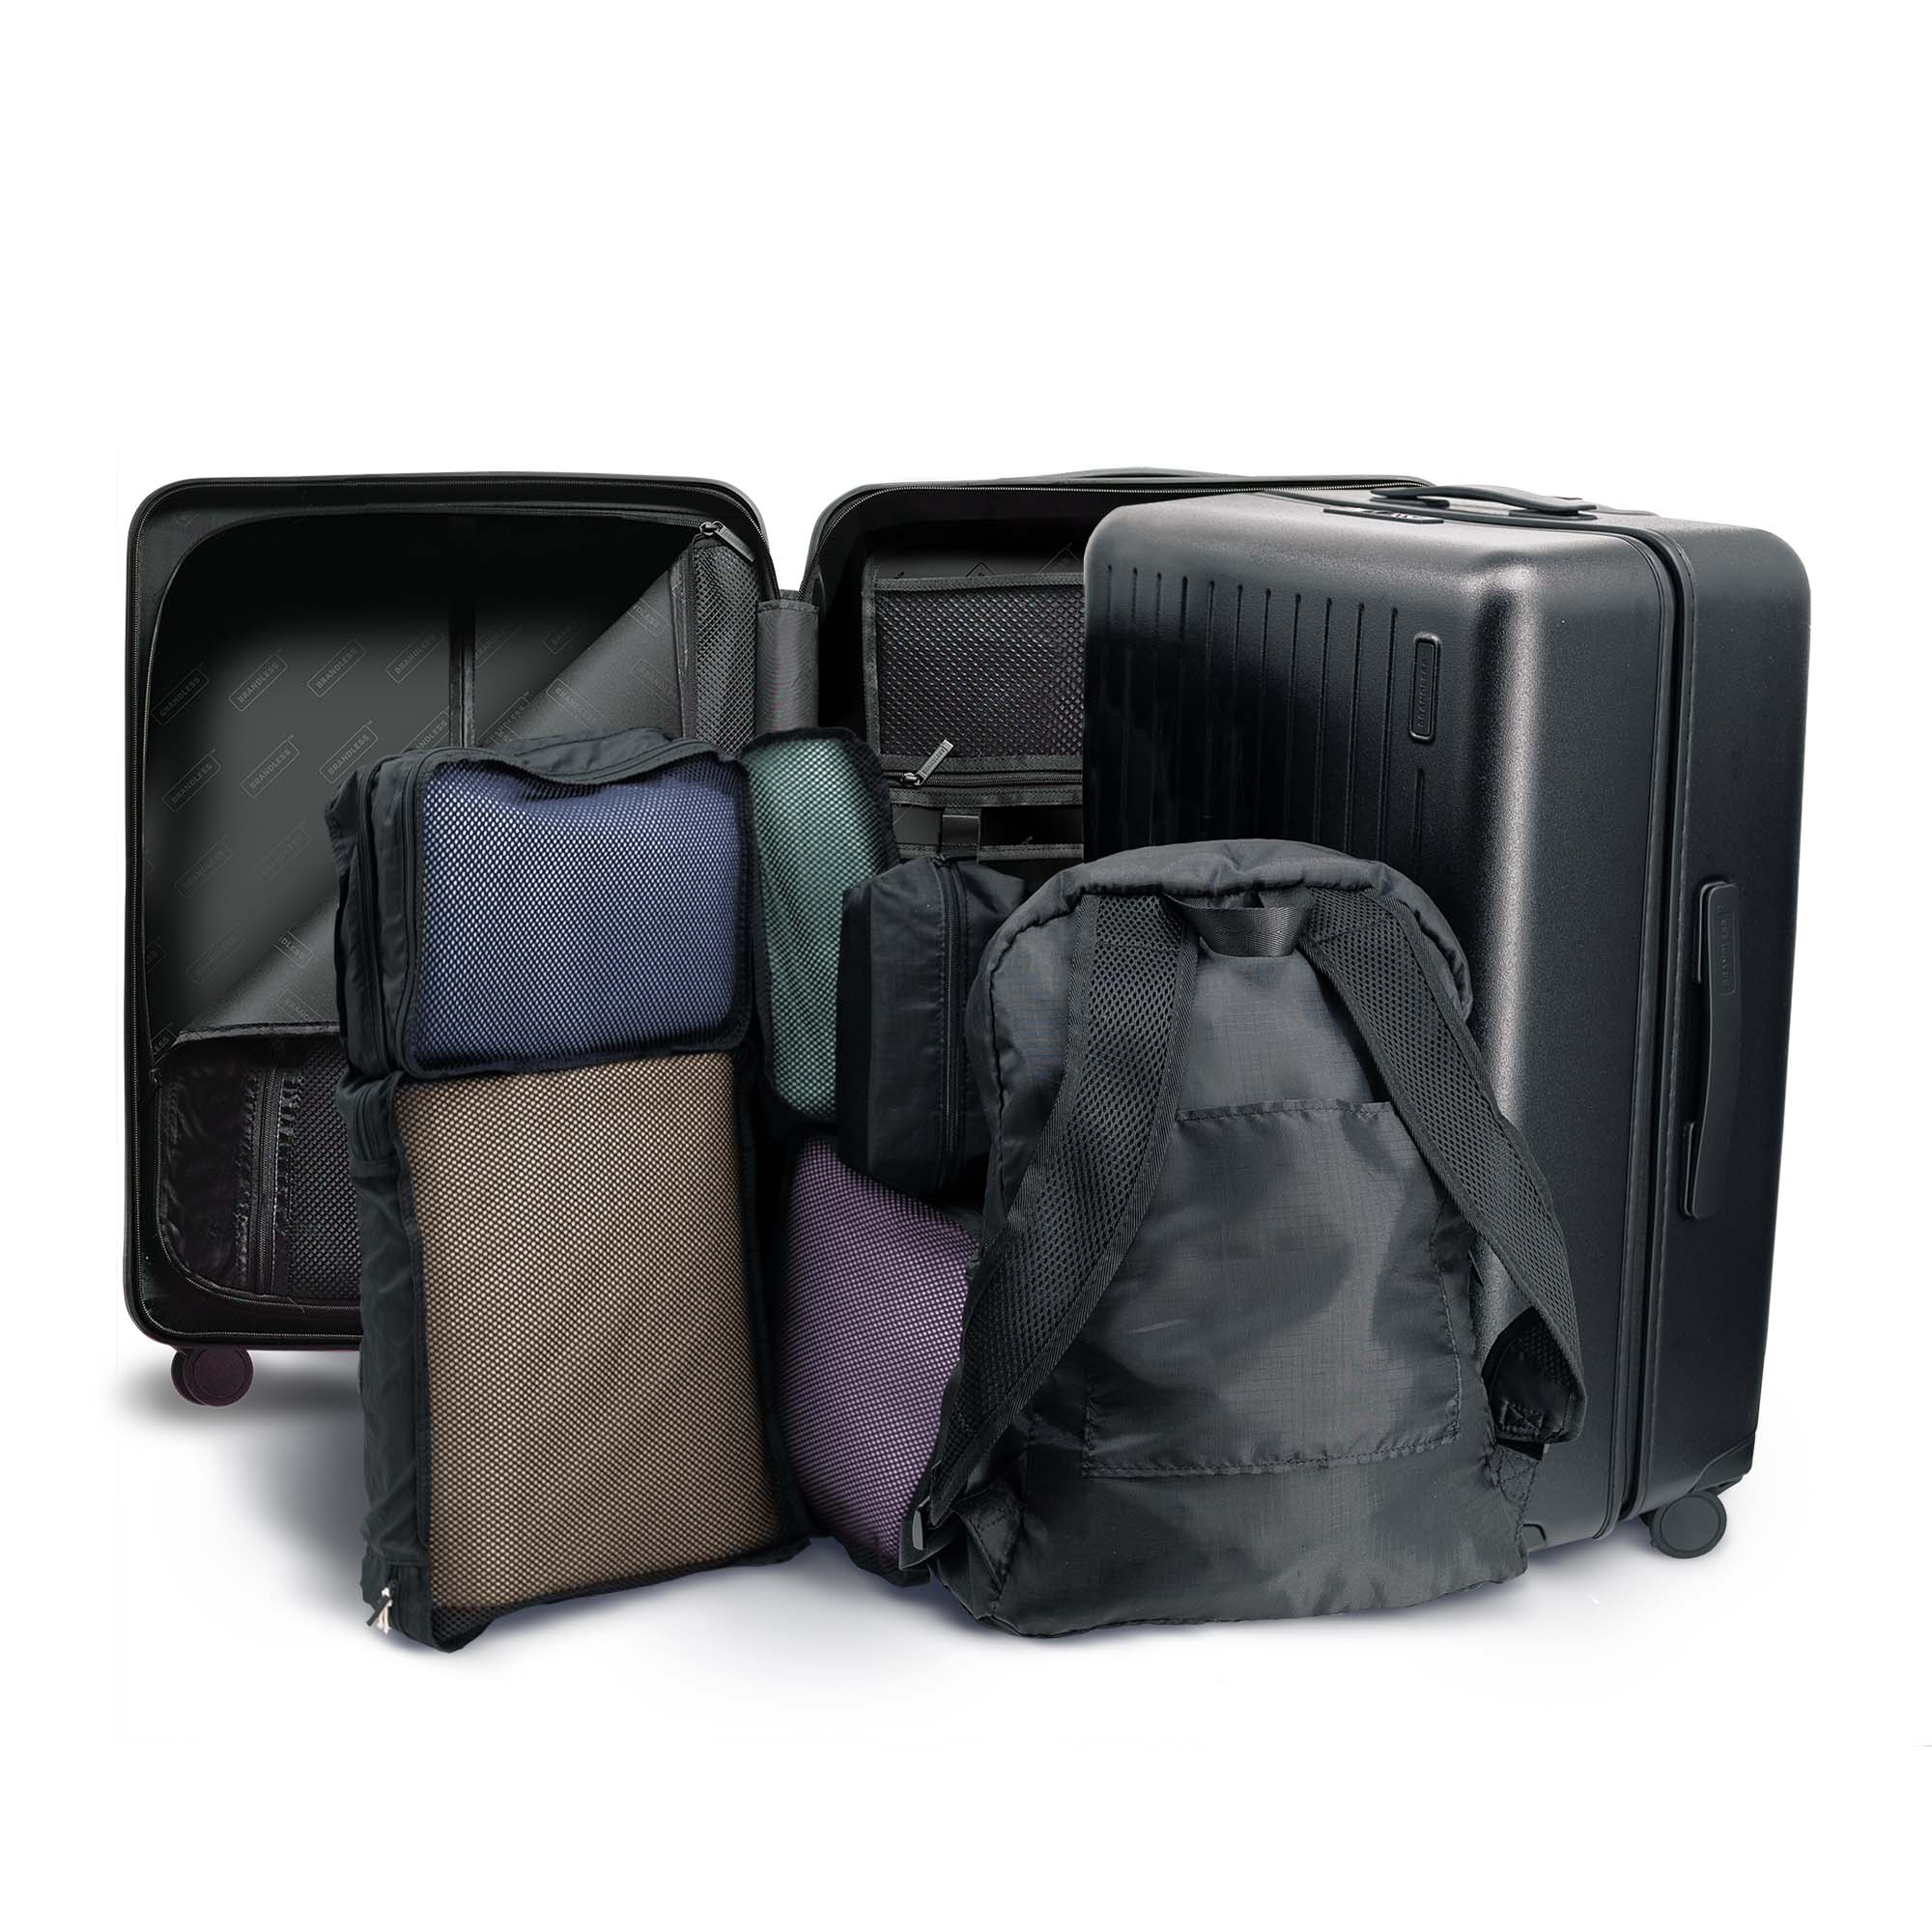 Bundle image, showing 2 checked luggages, foldable backpack, set of travel cubes, and travel pouch.